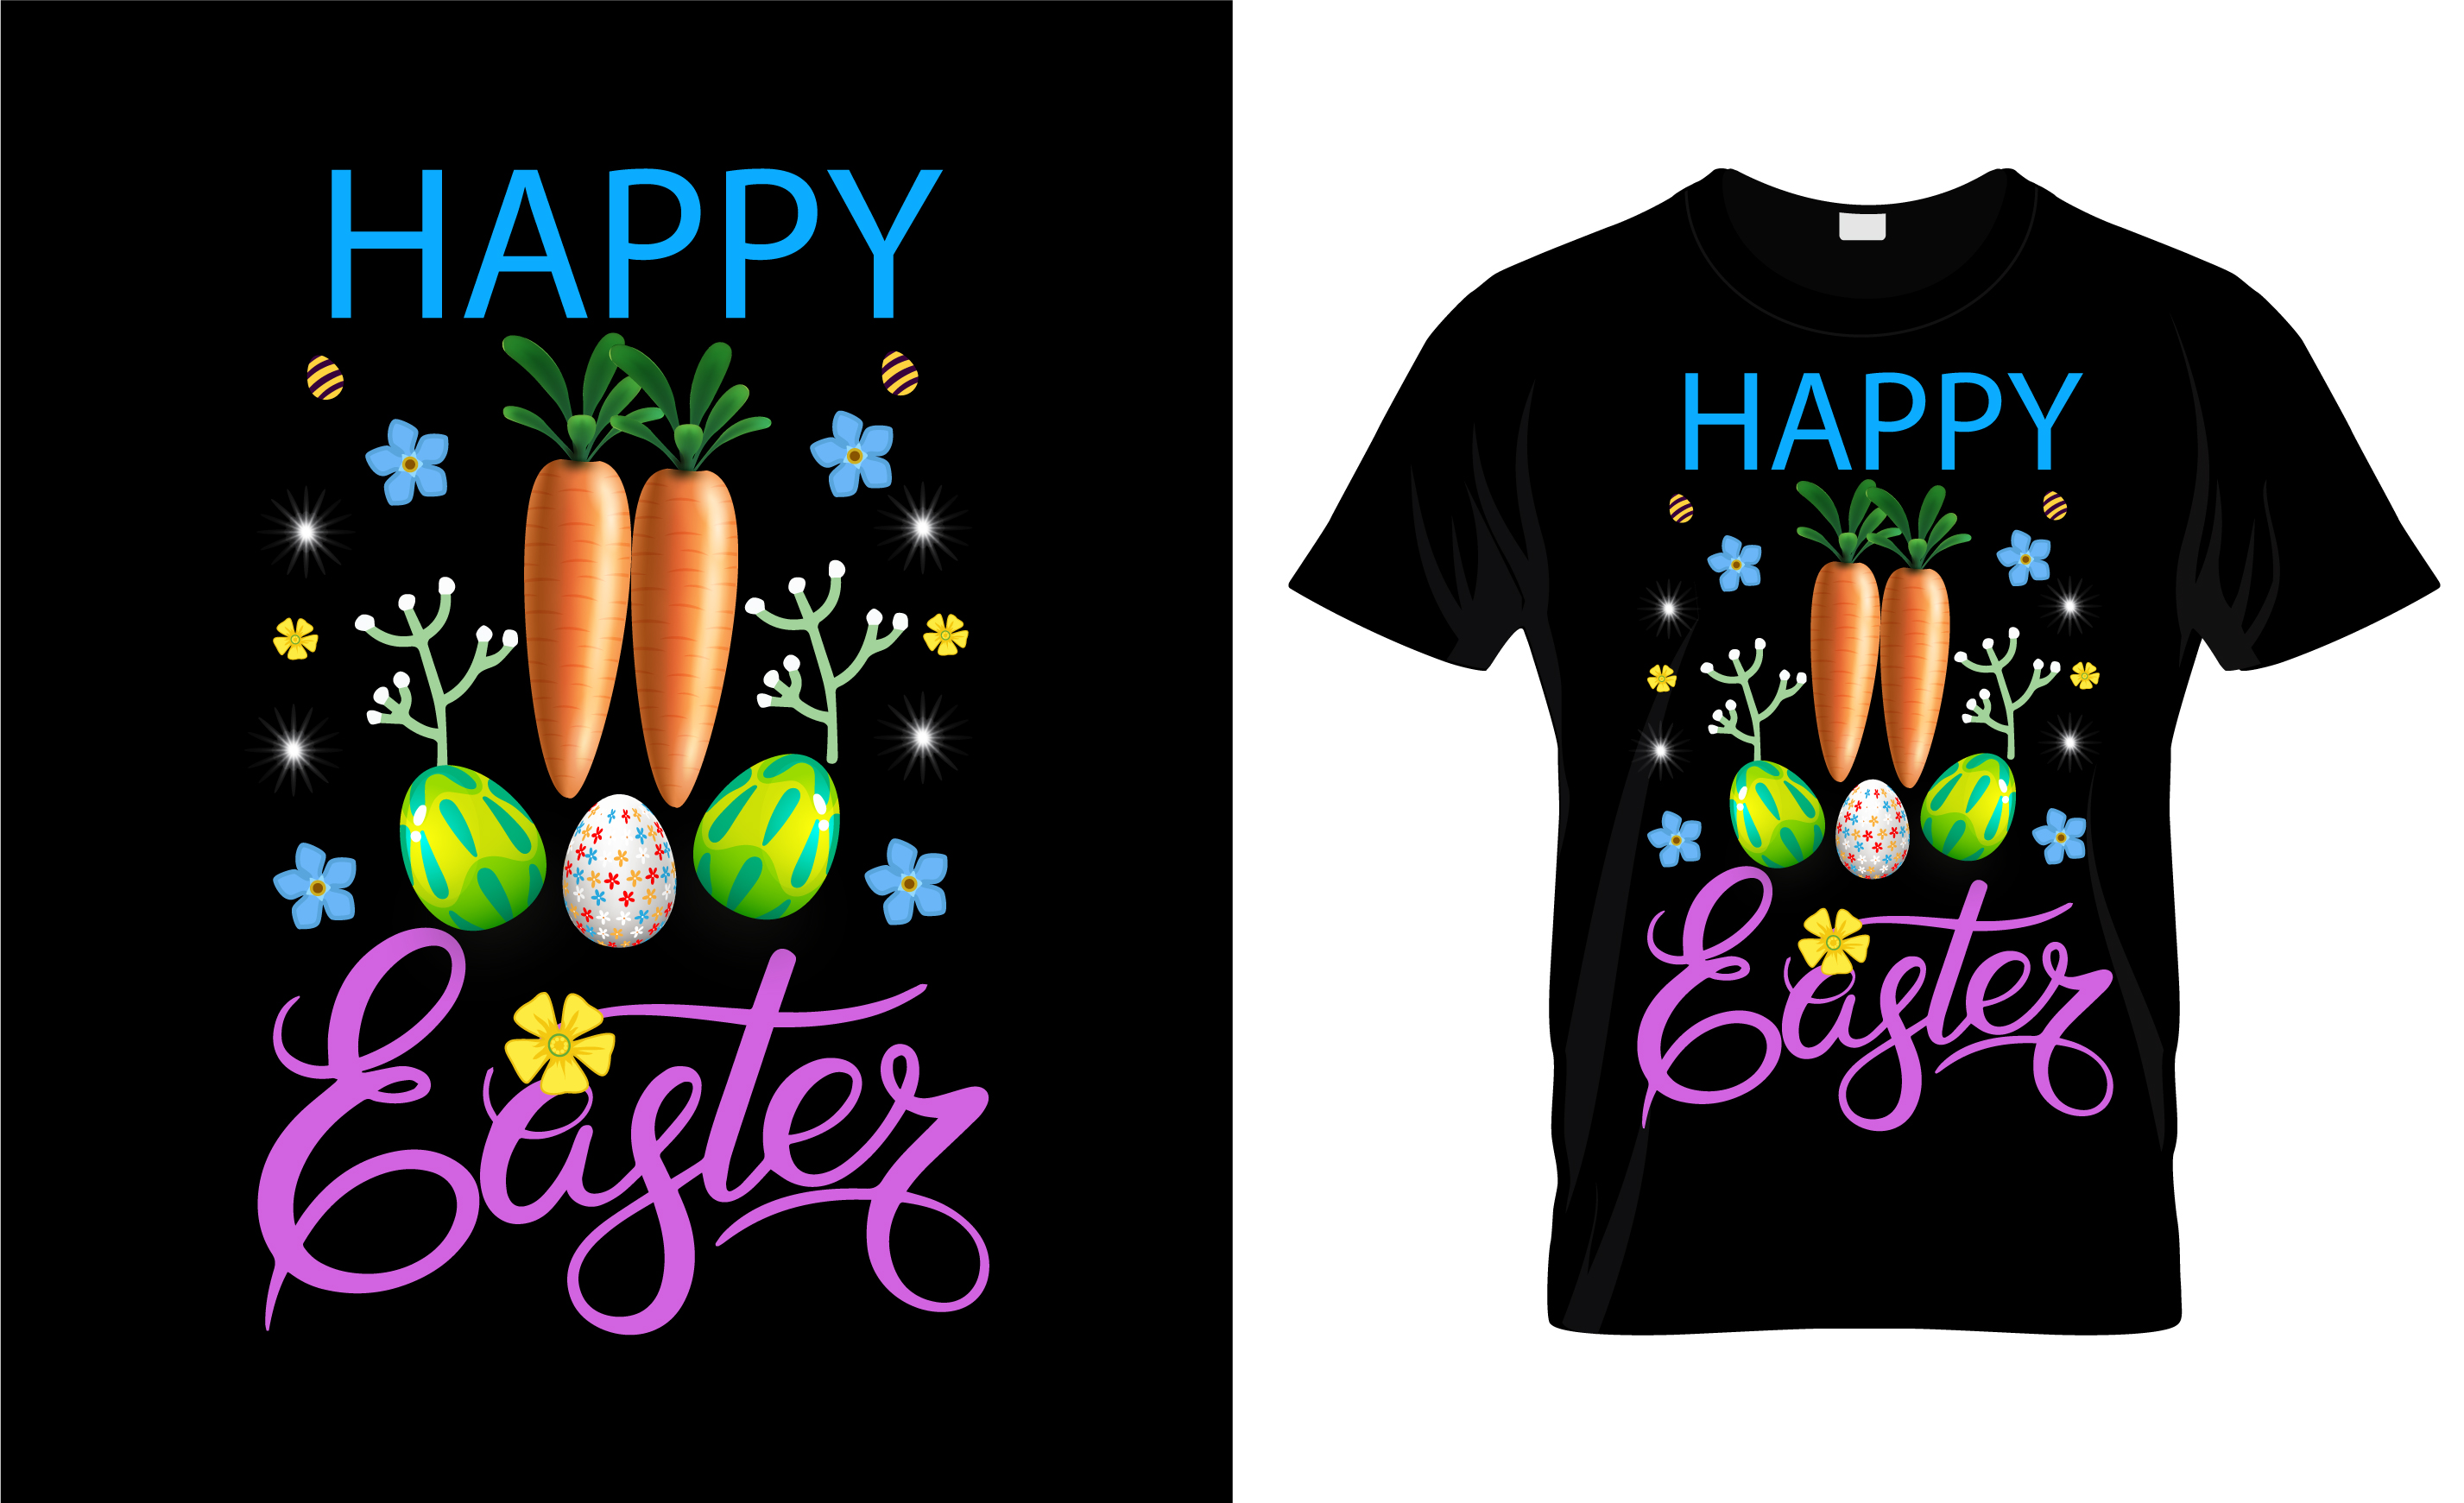 Image of a black t-shirt with an irresistible print on an easter theme.